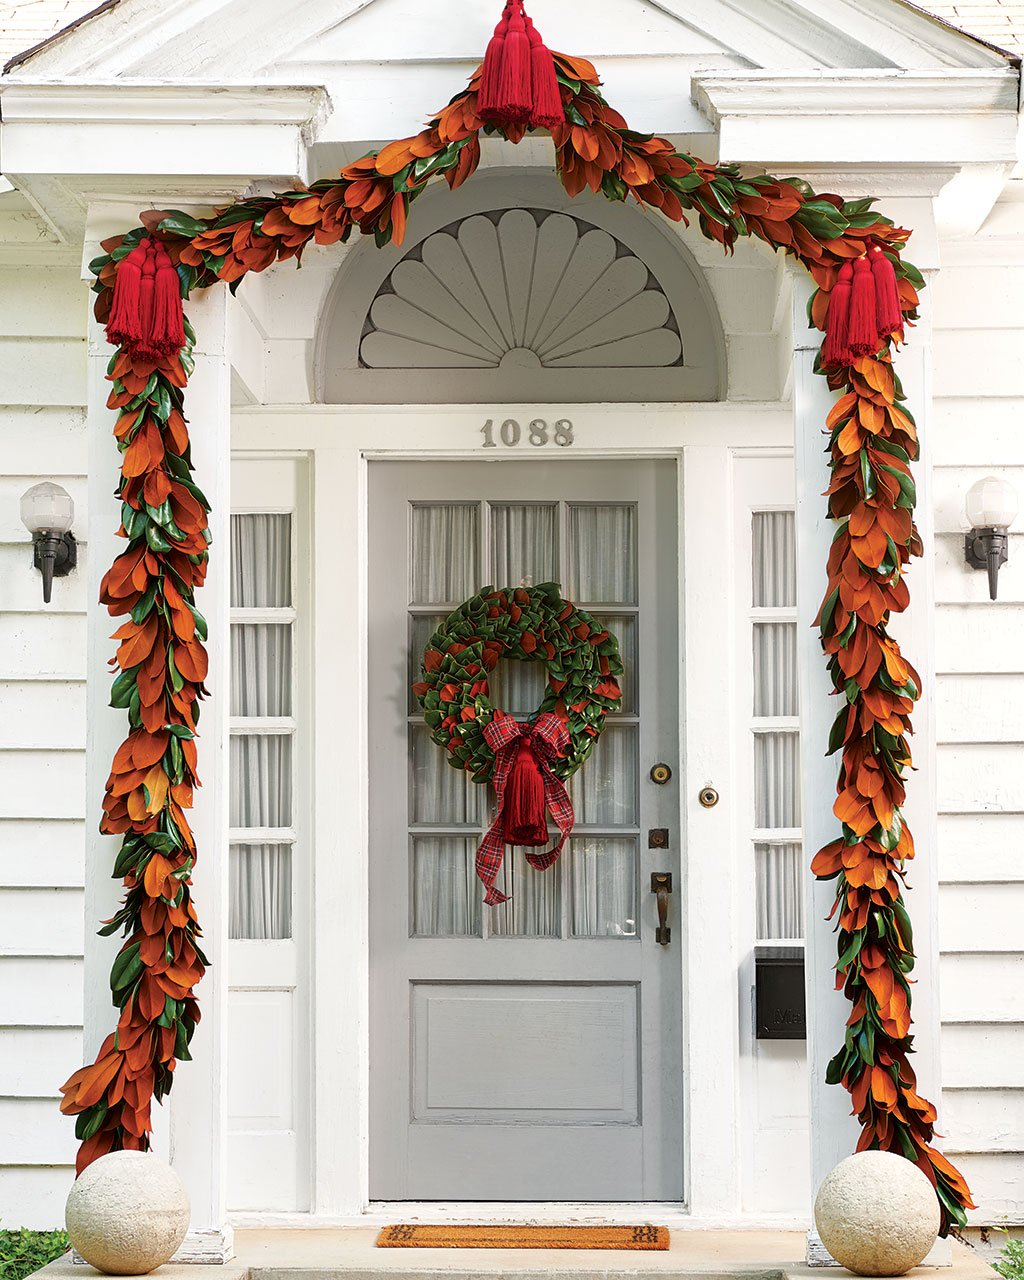 10 Festive, Holiday Front Doors to Inspire - How To Decorate